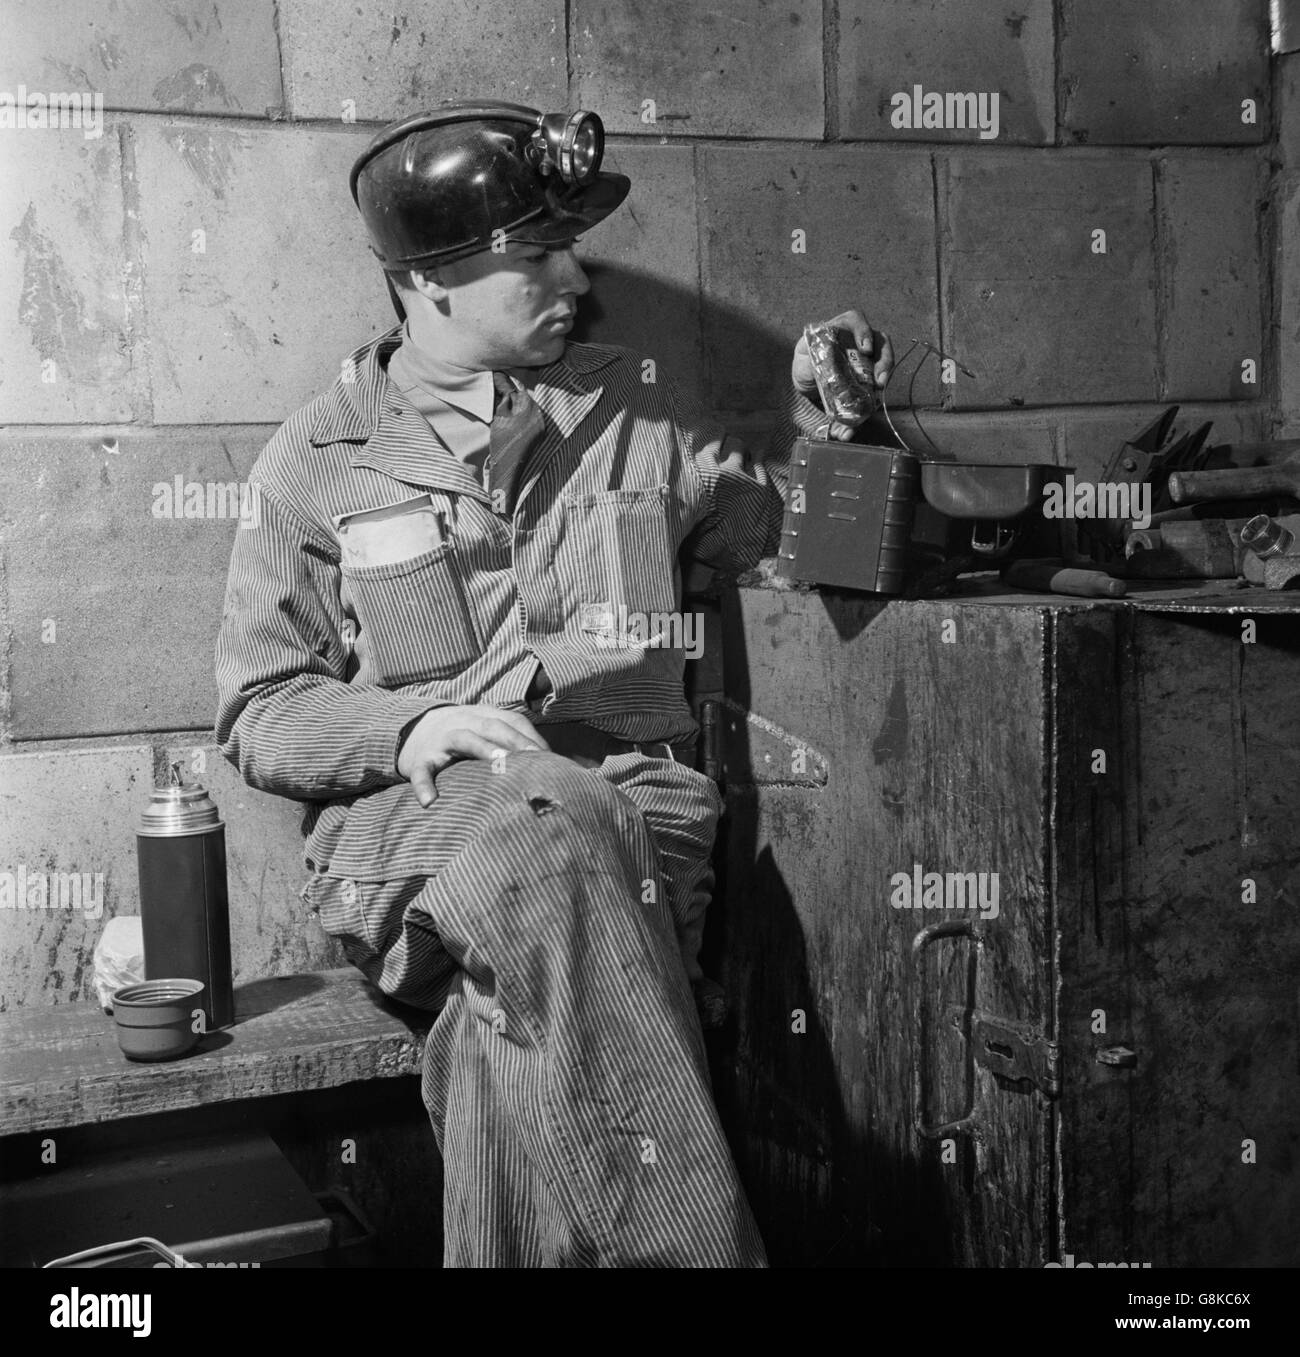 Miner Having Lunch in Machine Shop, Montour No. 4 Mine of Pittsburgh Coal Company, Pittsburgh, Pennsylvania, USA, John Collier for Office of War Information, November 1942 Stock Photo